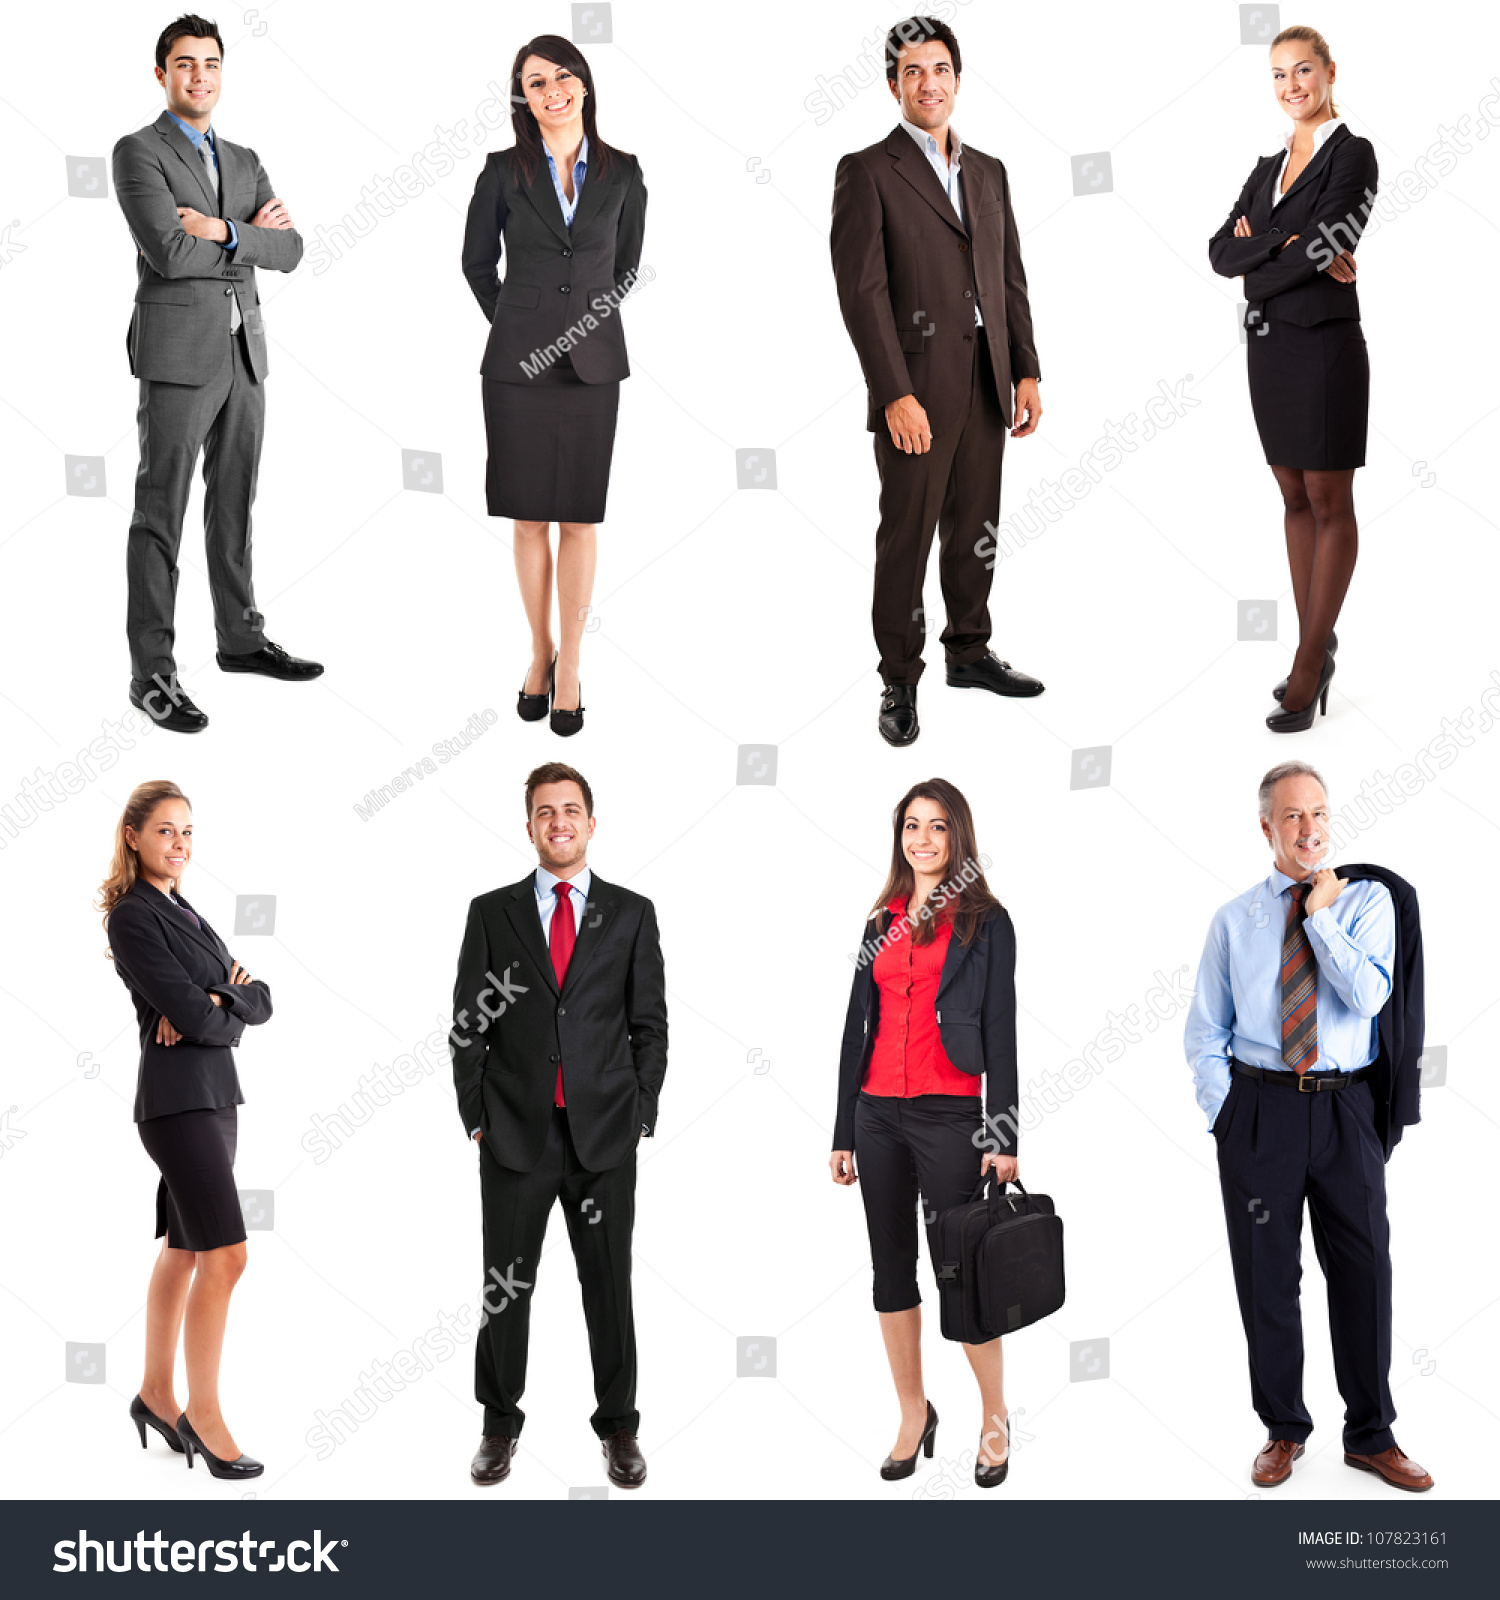 Collection Of Full Length Portraits Of Business People Stock Photo ...